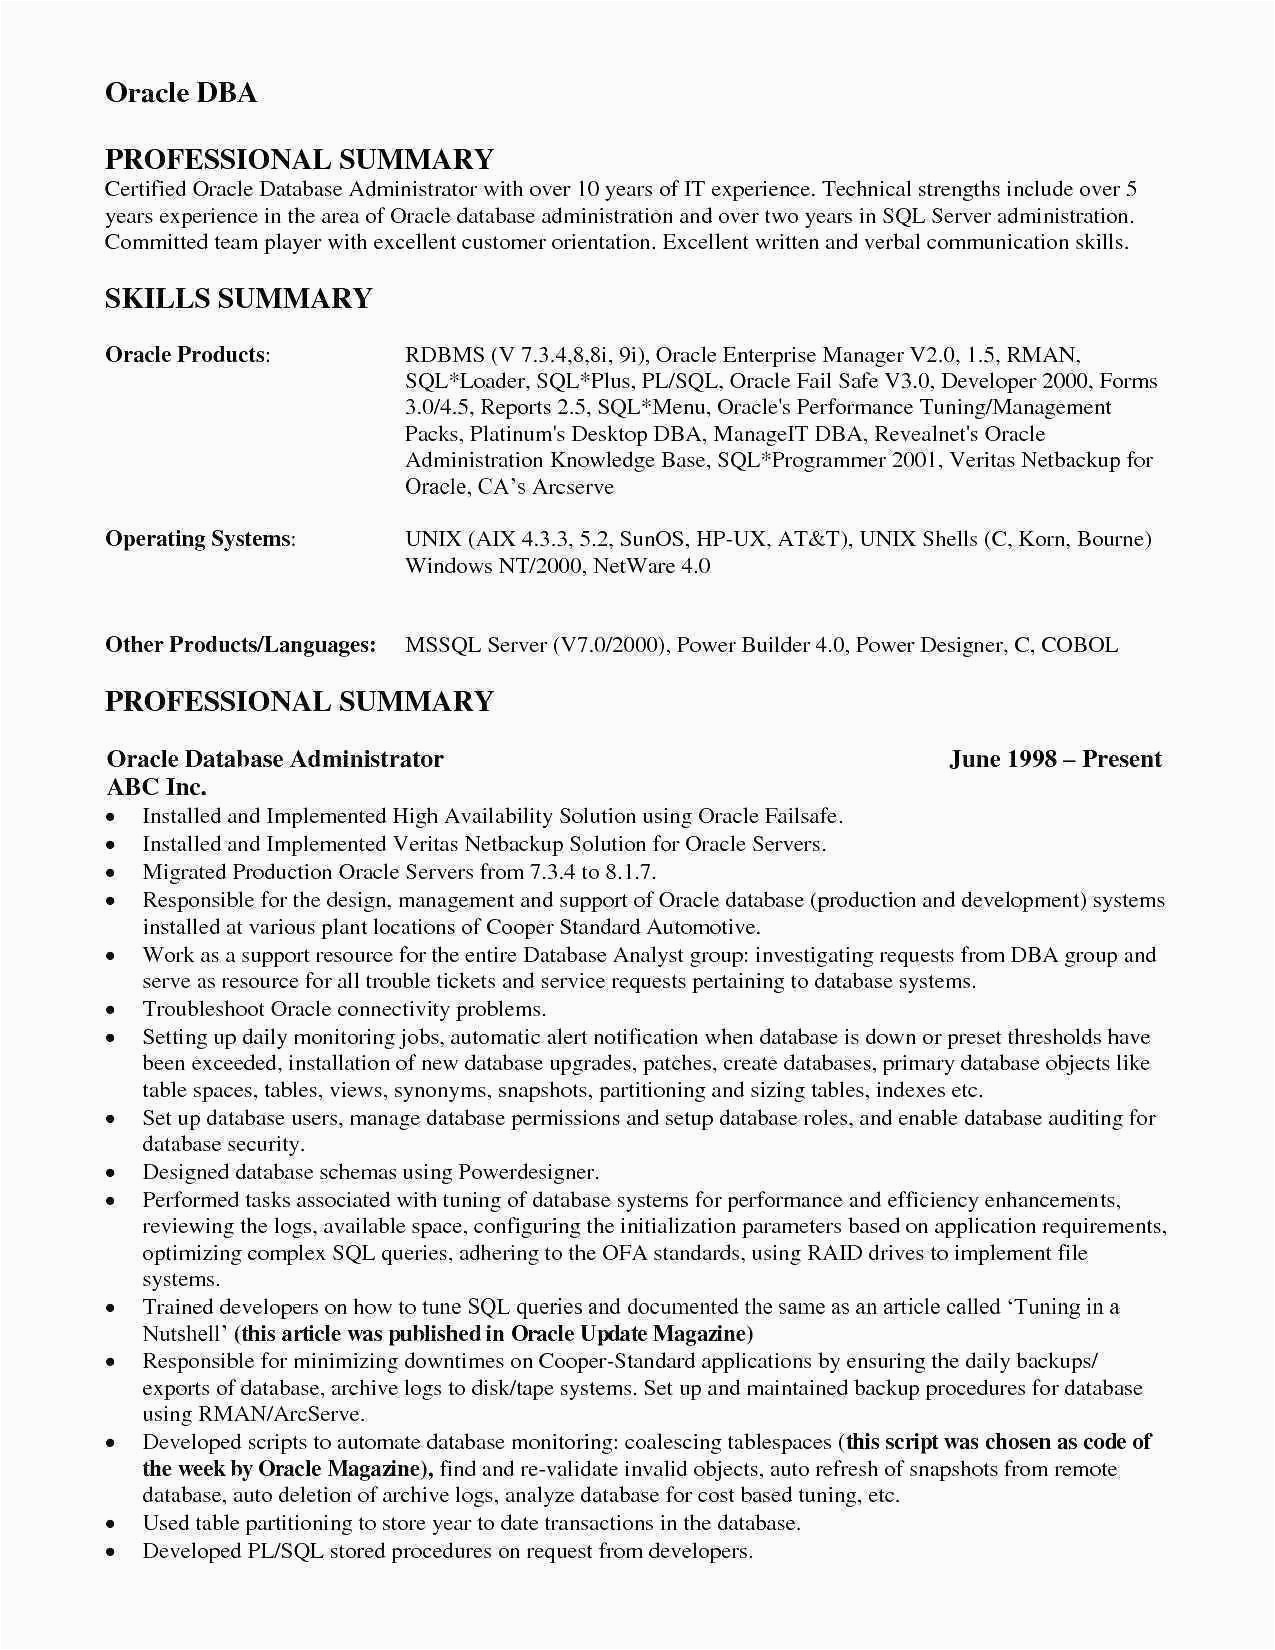 System Administrator Sample Resume 2 Years Experience Hr Resume Sample for 2 Years Experience Best Resume Examples